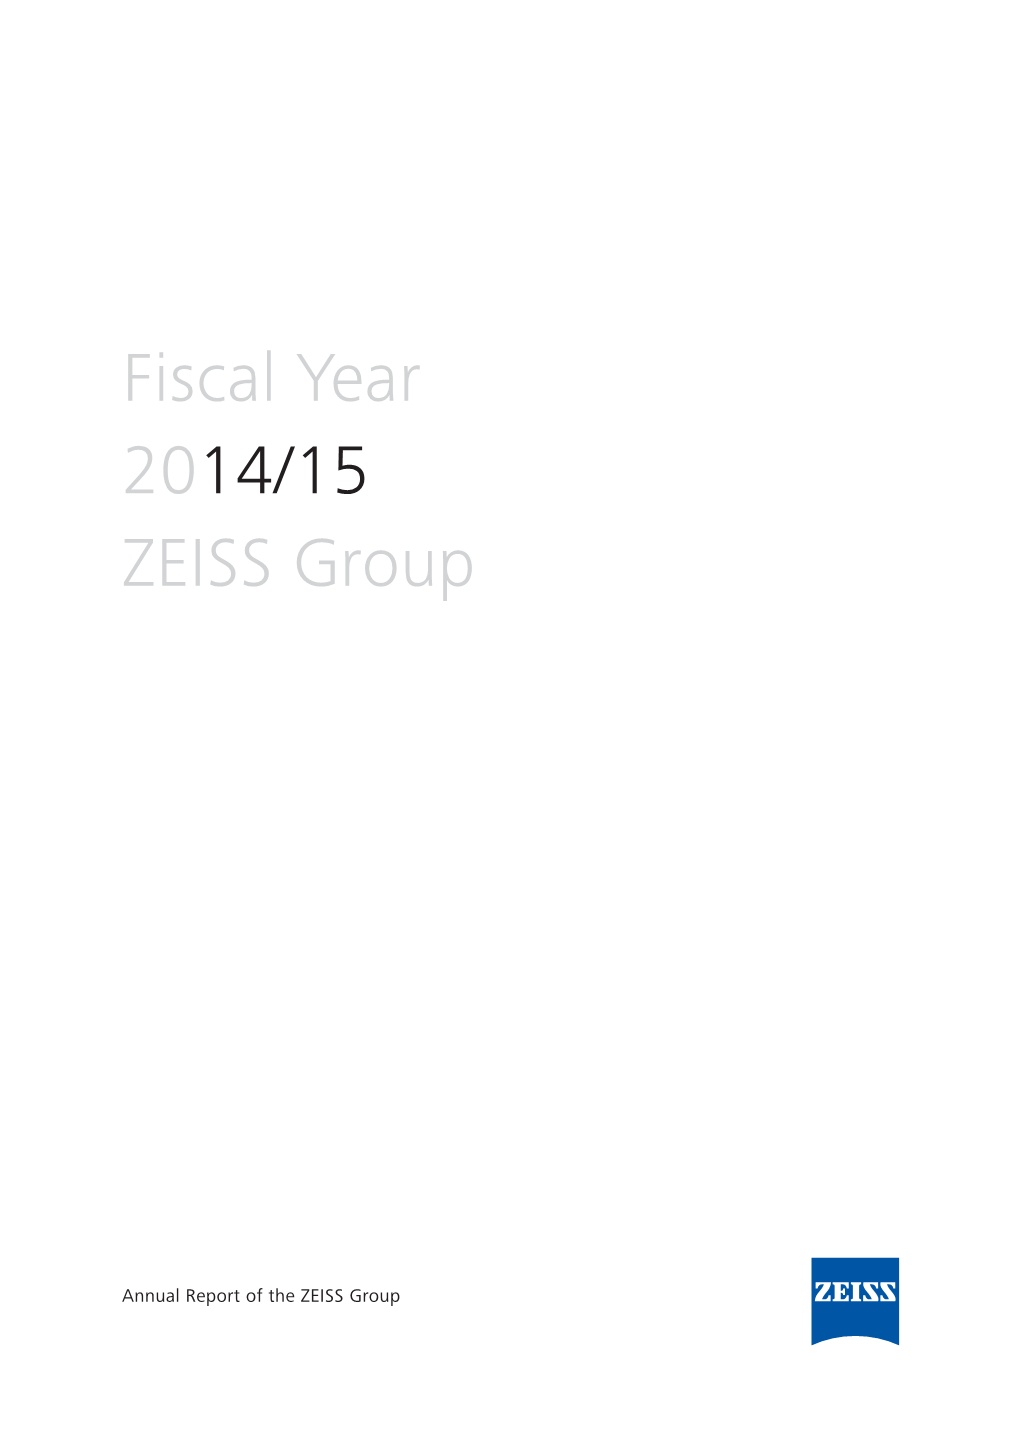 Annual Report 2014/15 of the ZEISS Group